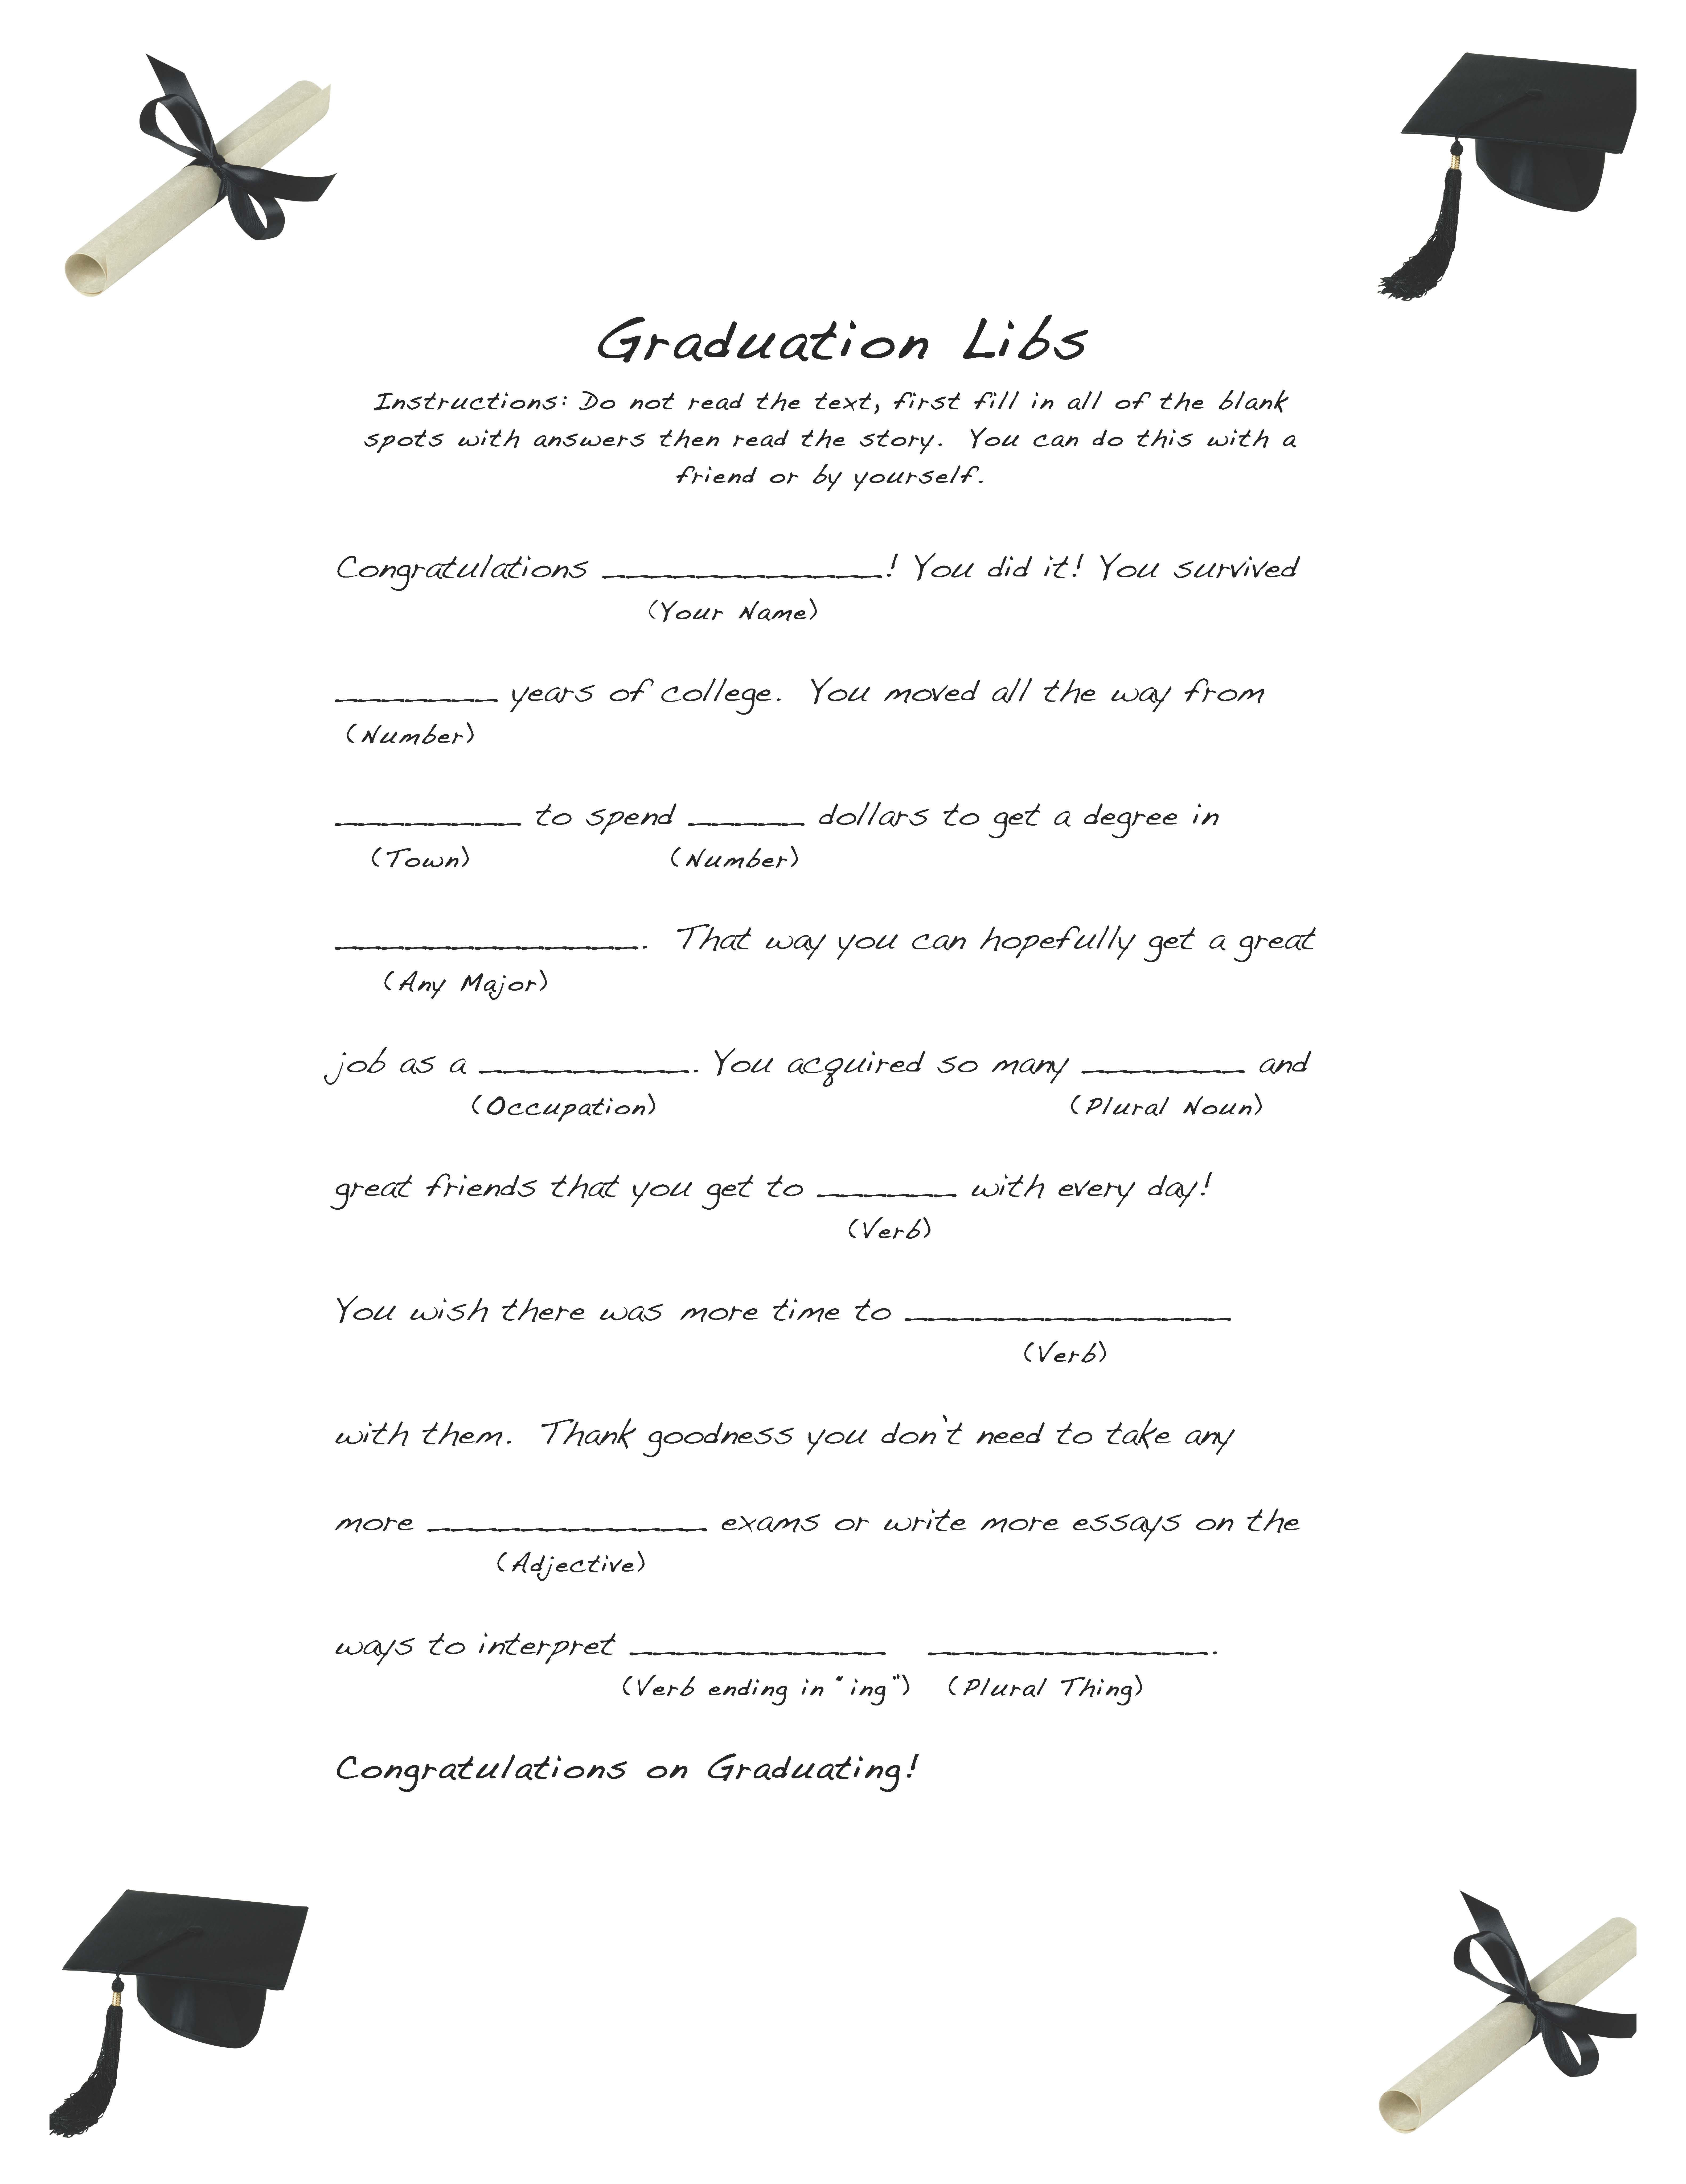 Free And Easy Graduation Libs – Easy Event Ideas - Free Printable Graduation Party Games